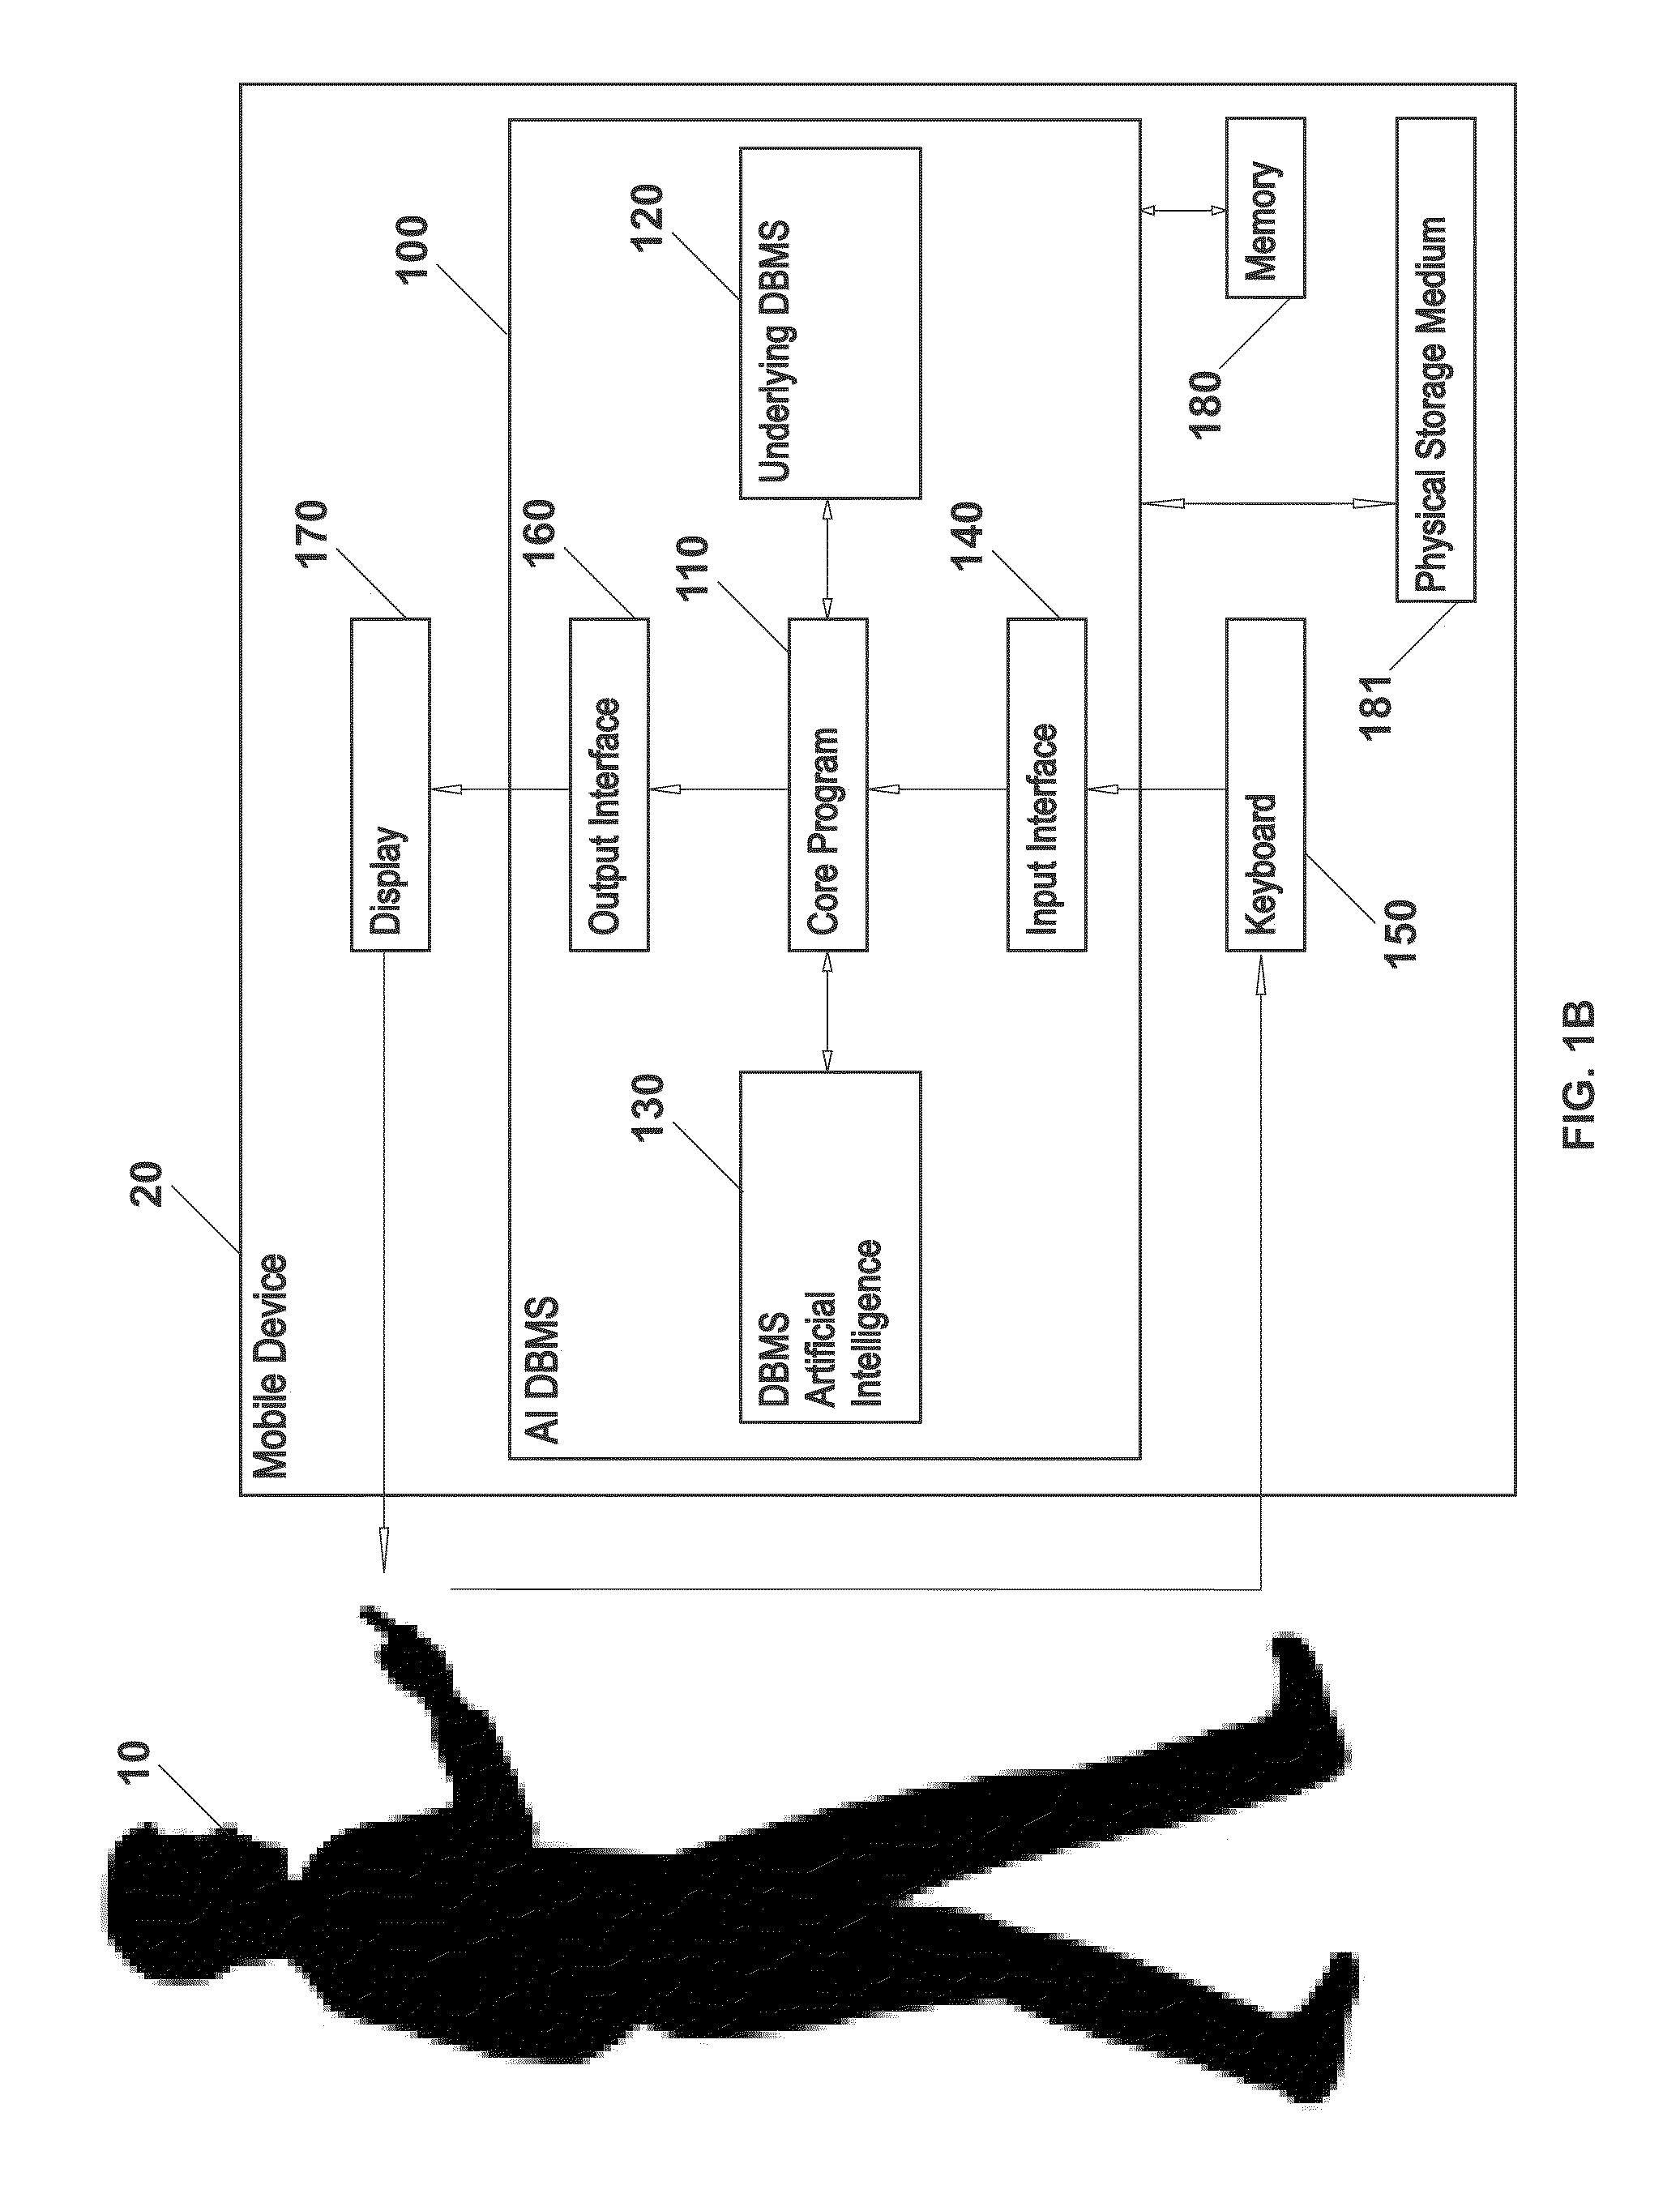 Systems and methods of using an artificially intelligent database management system and interfaces for mobile, embedded, and other computing devices